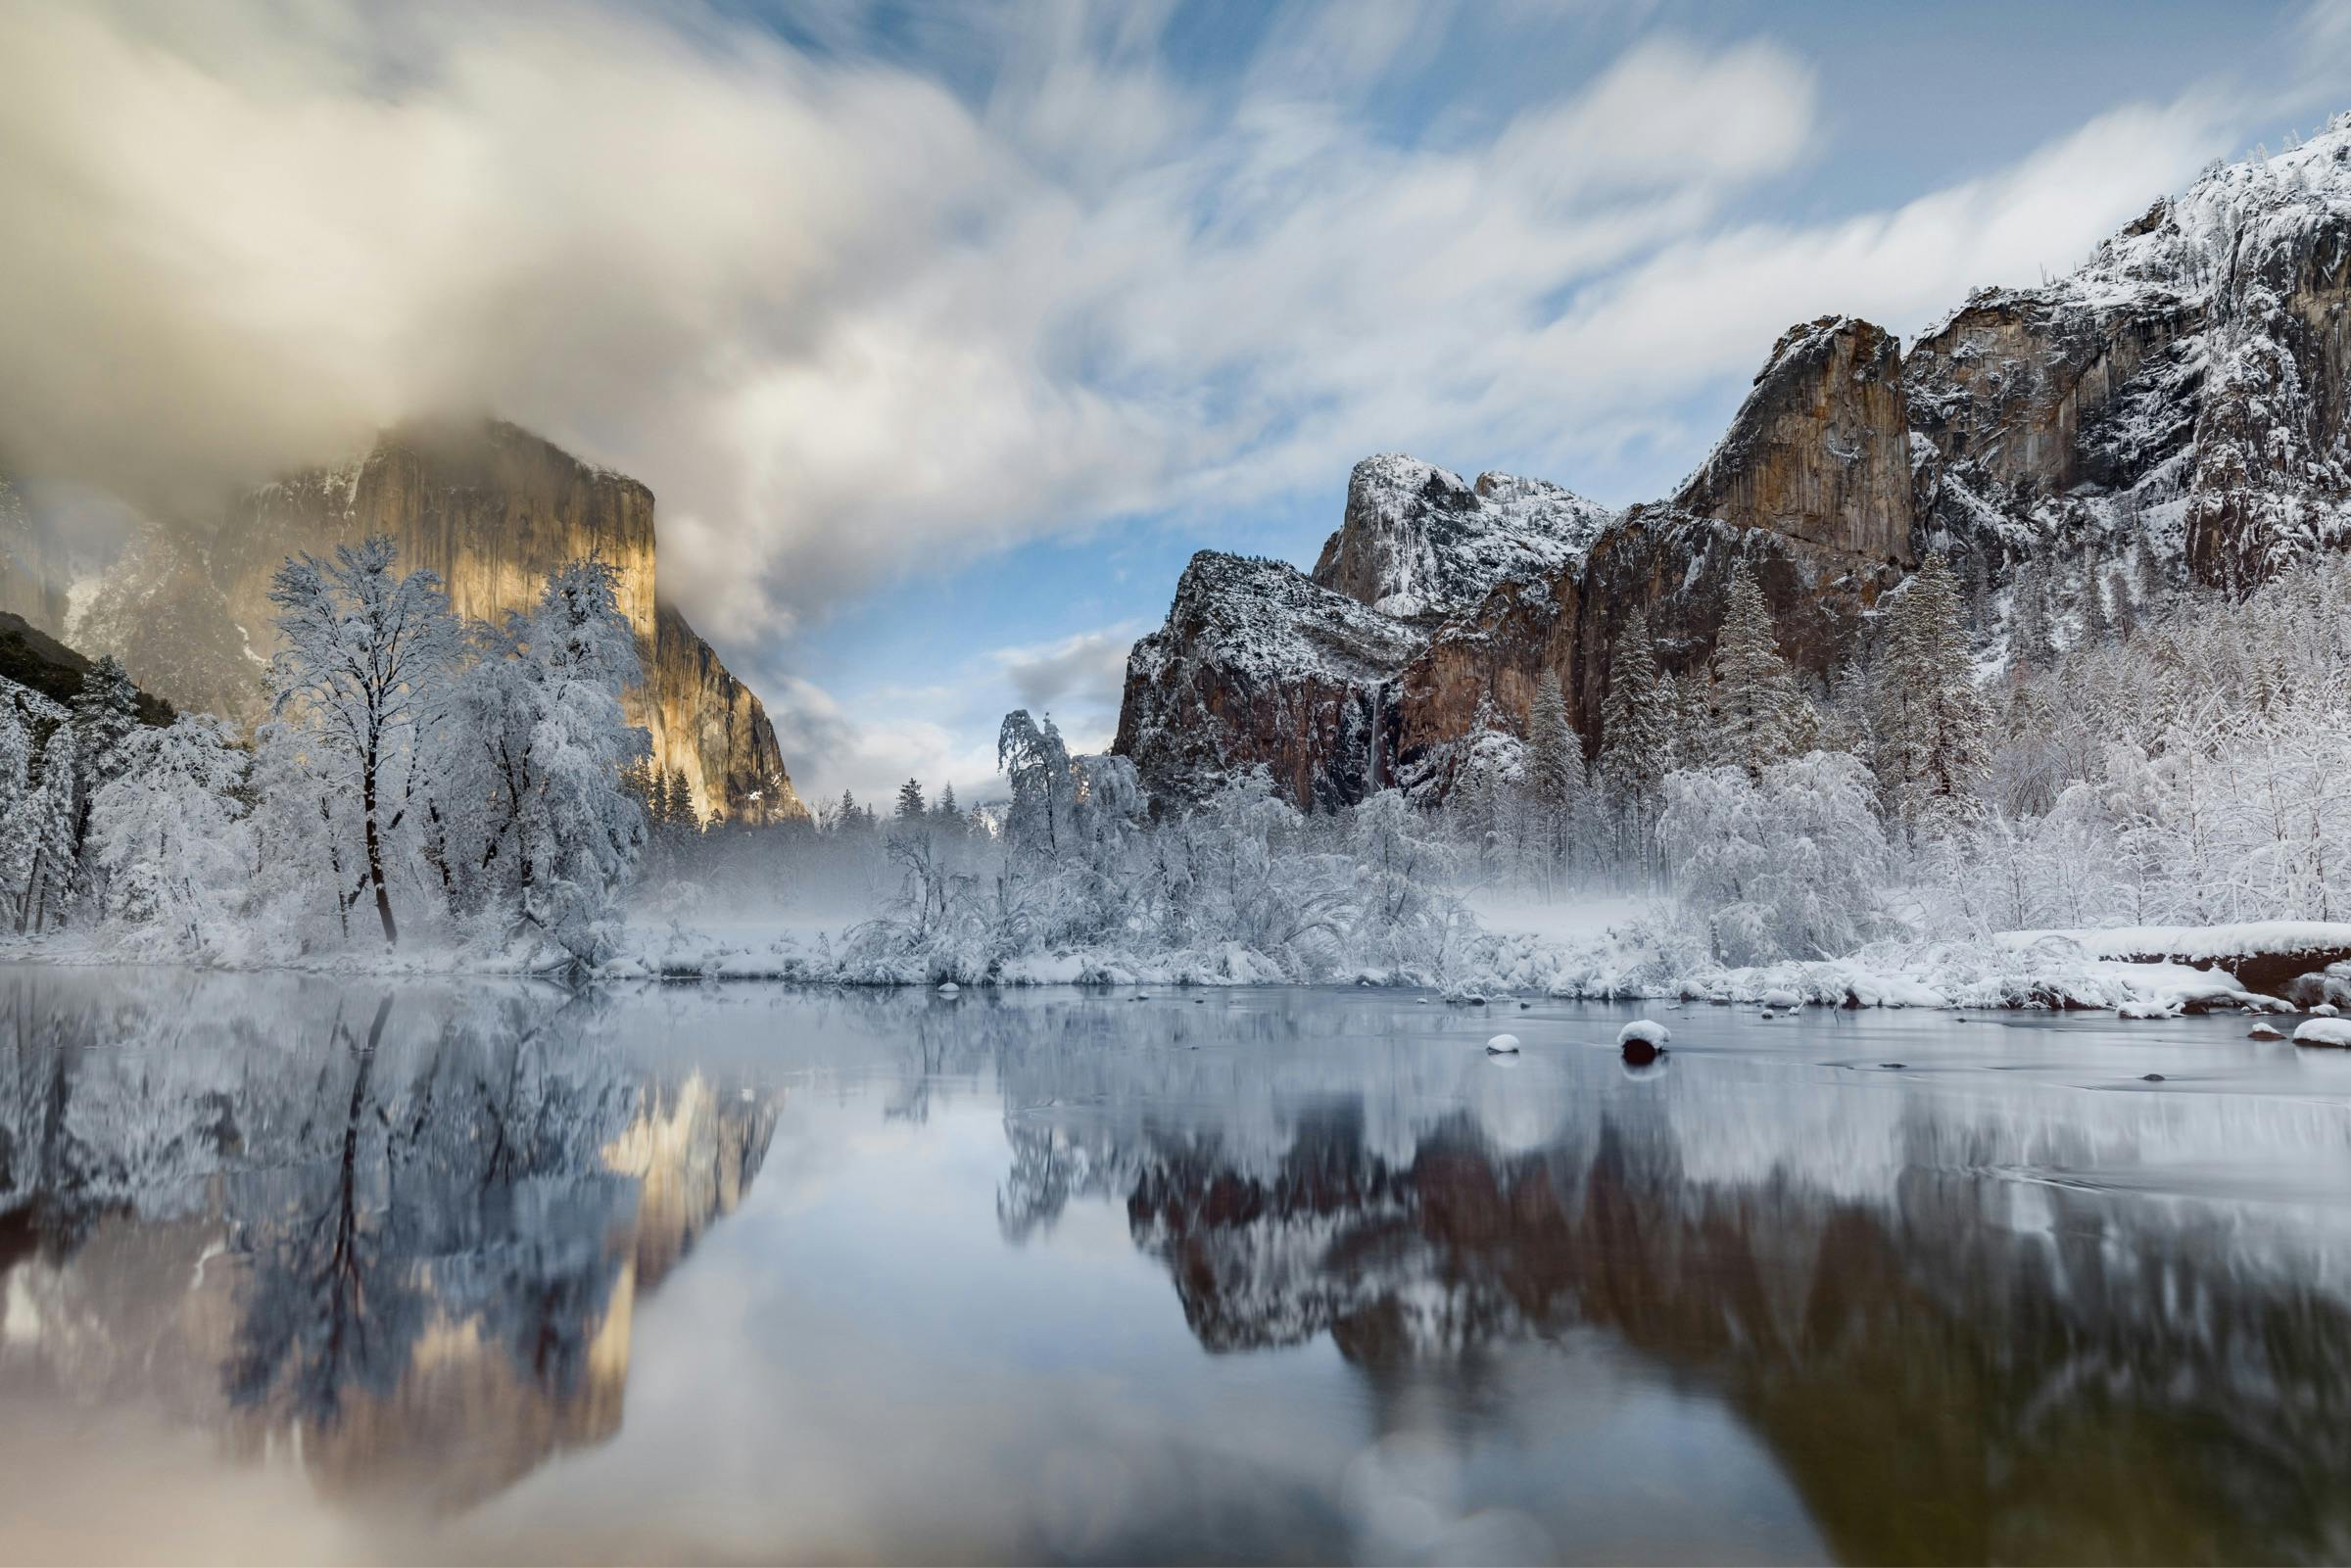 A frosty El Capitan and Bridalveil Falls reflecting in nearby pond.